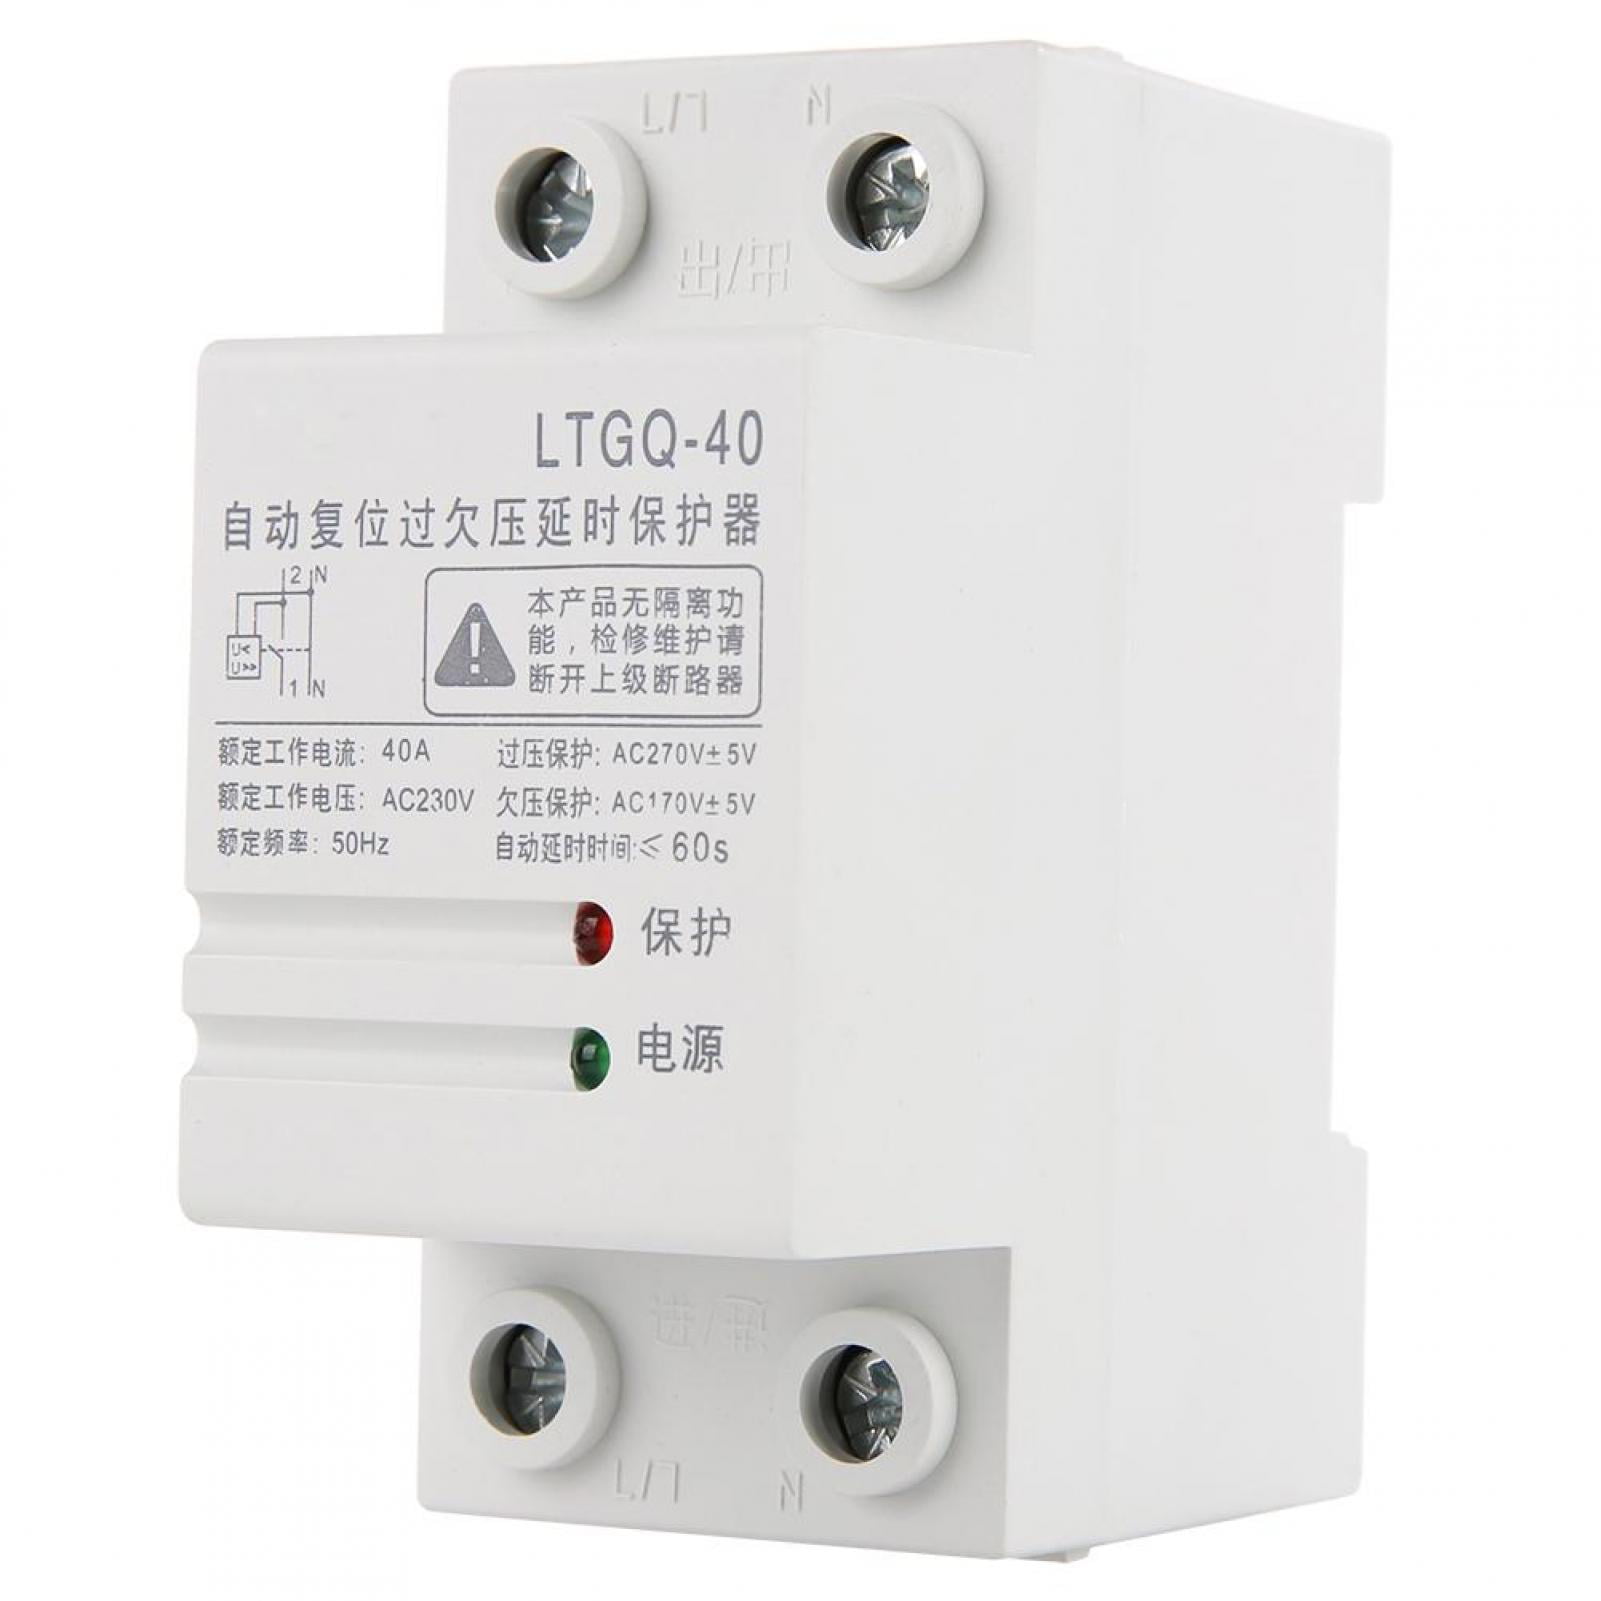 Zerone Voltage Protector Relay,230V Adjustable Automatic Reconnect Over Voltage And Under Voltage Protection Relay 2P40A 